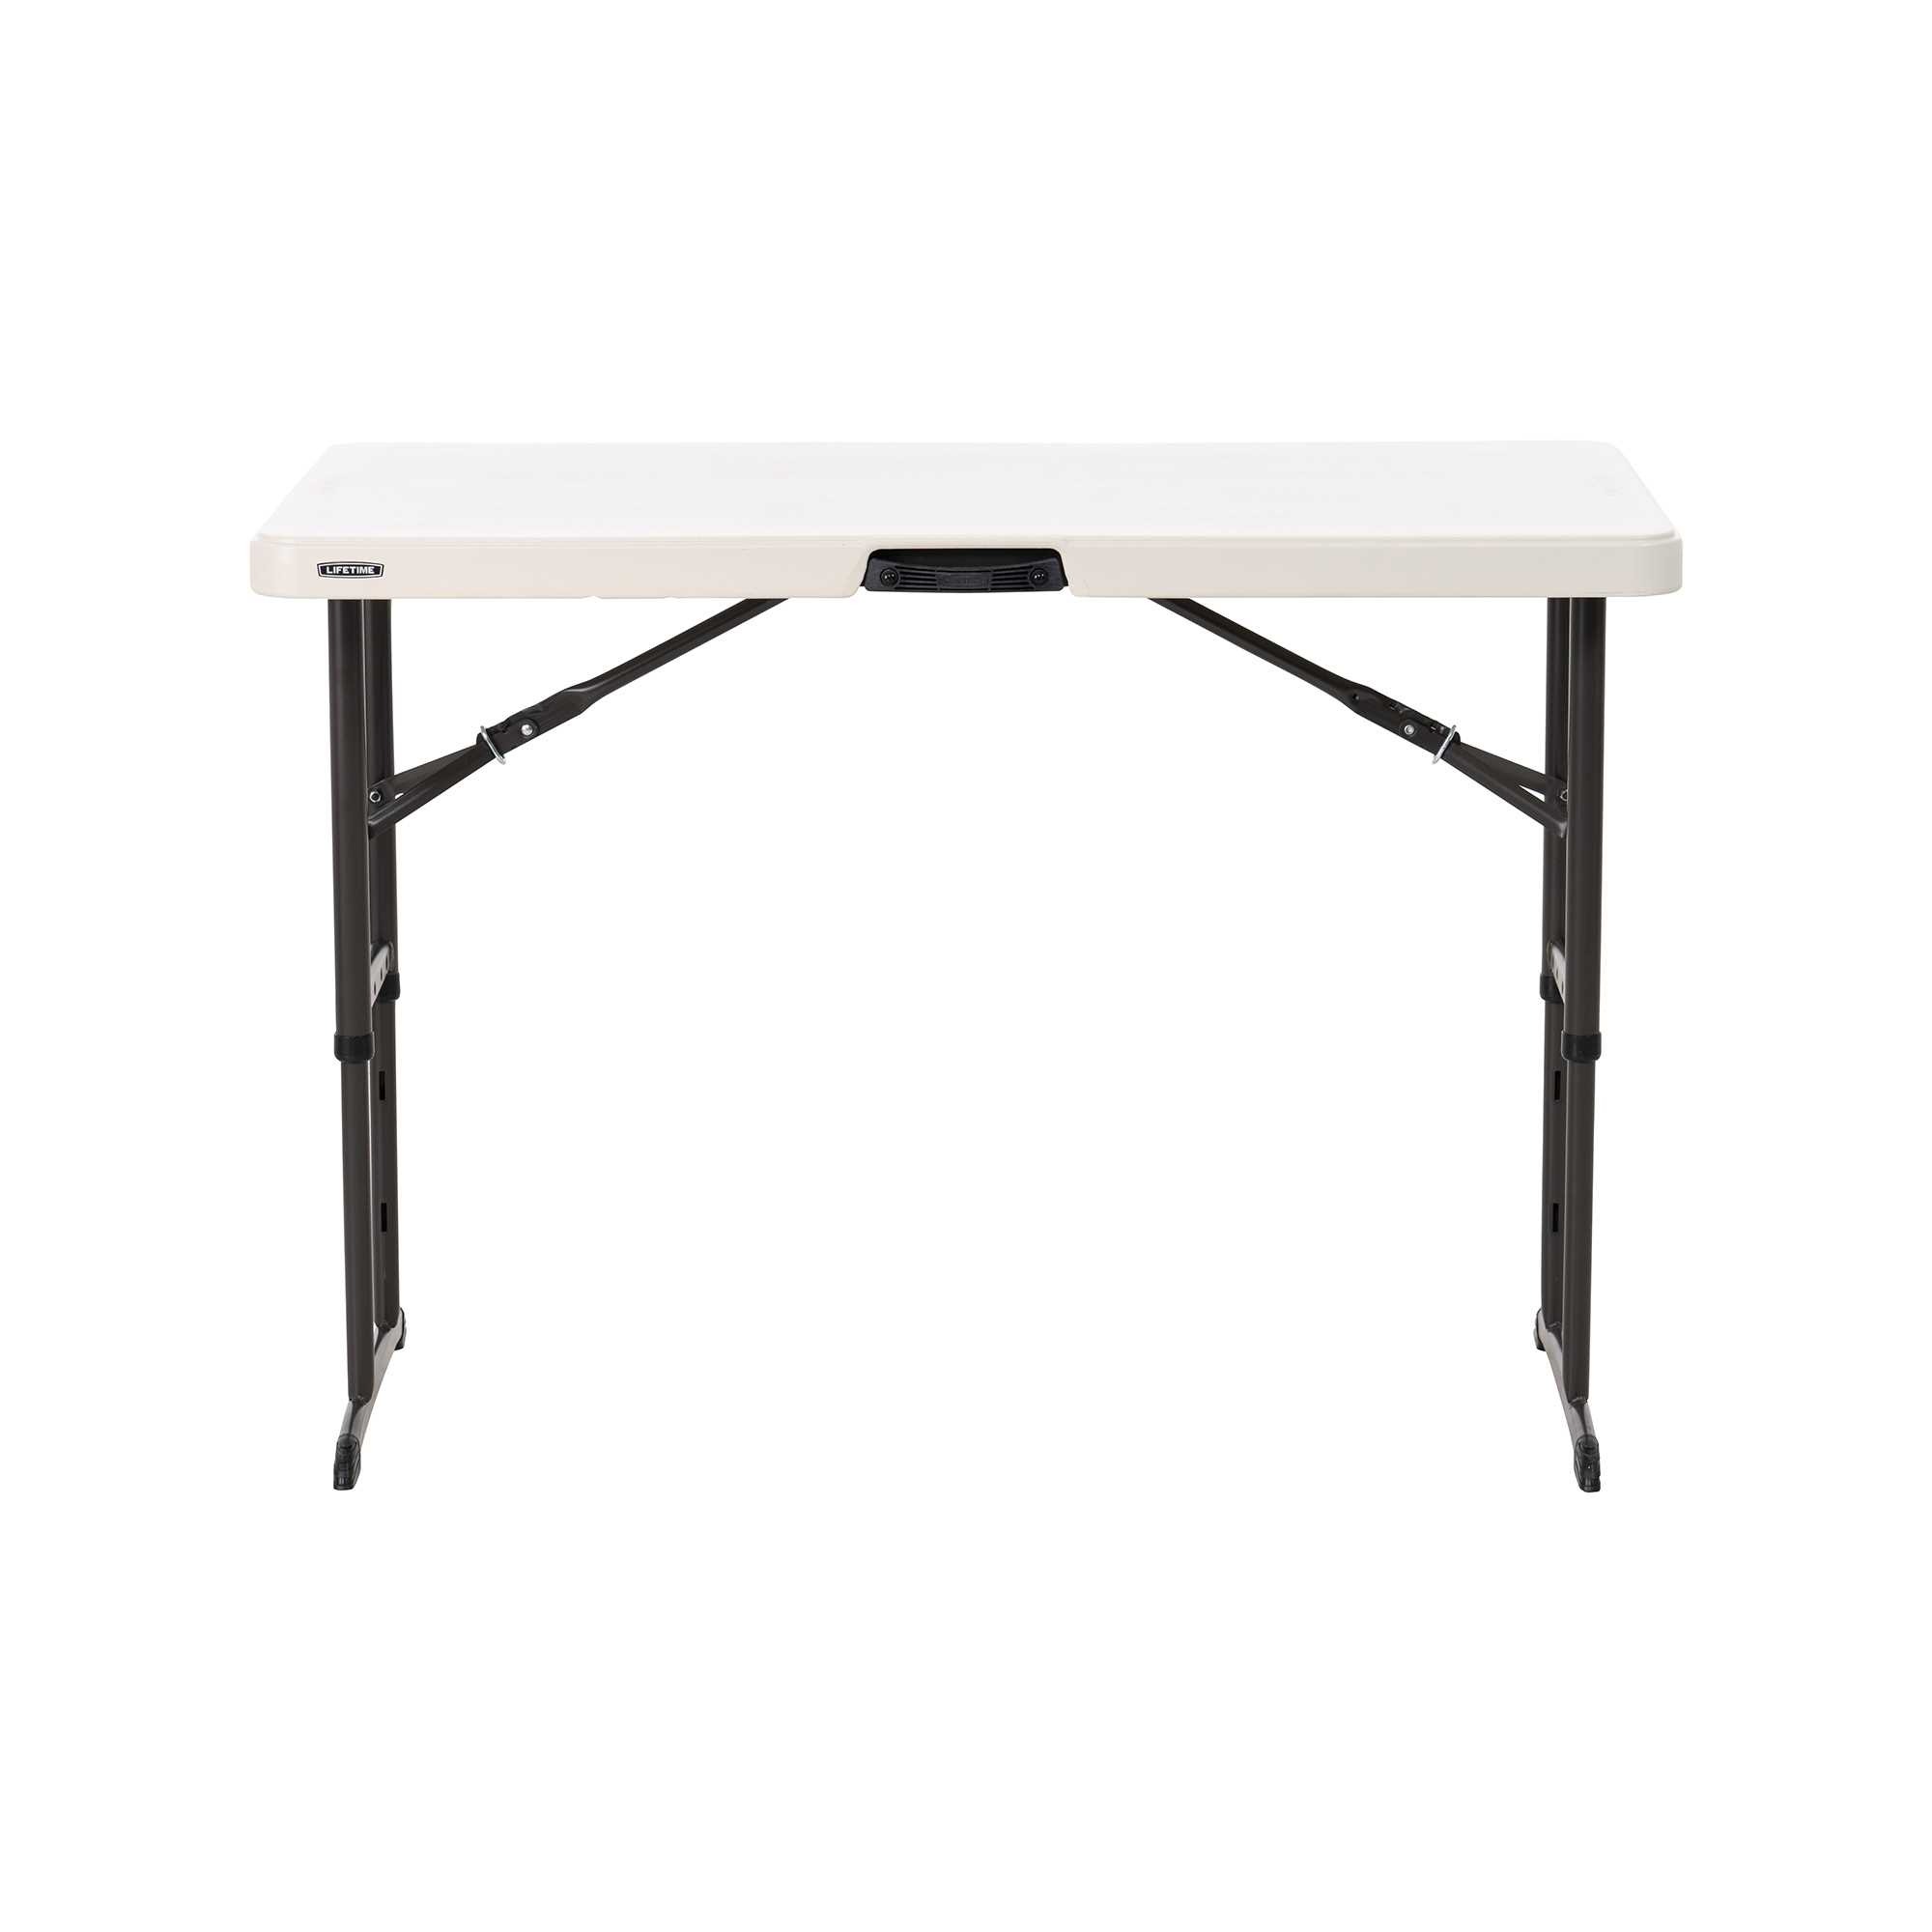 4ft Rectangular folding table 122cm / Adjustable height / 4 people / NESTING heavy commercial